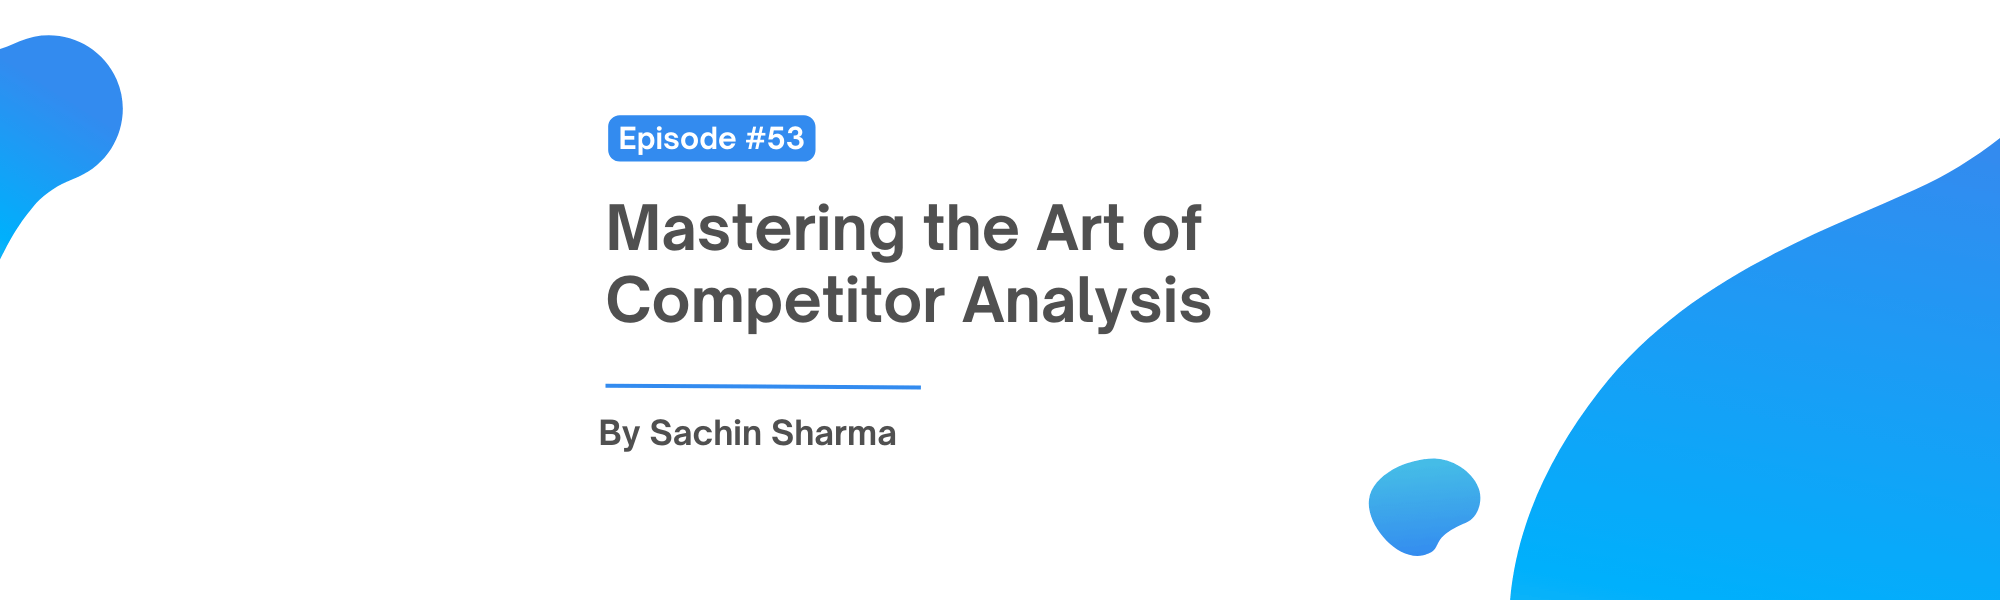 Mastering the Art of Competitor Analysis